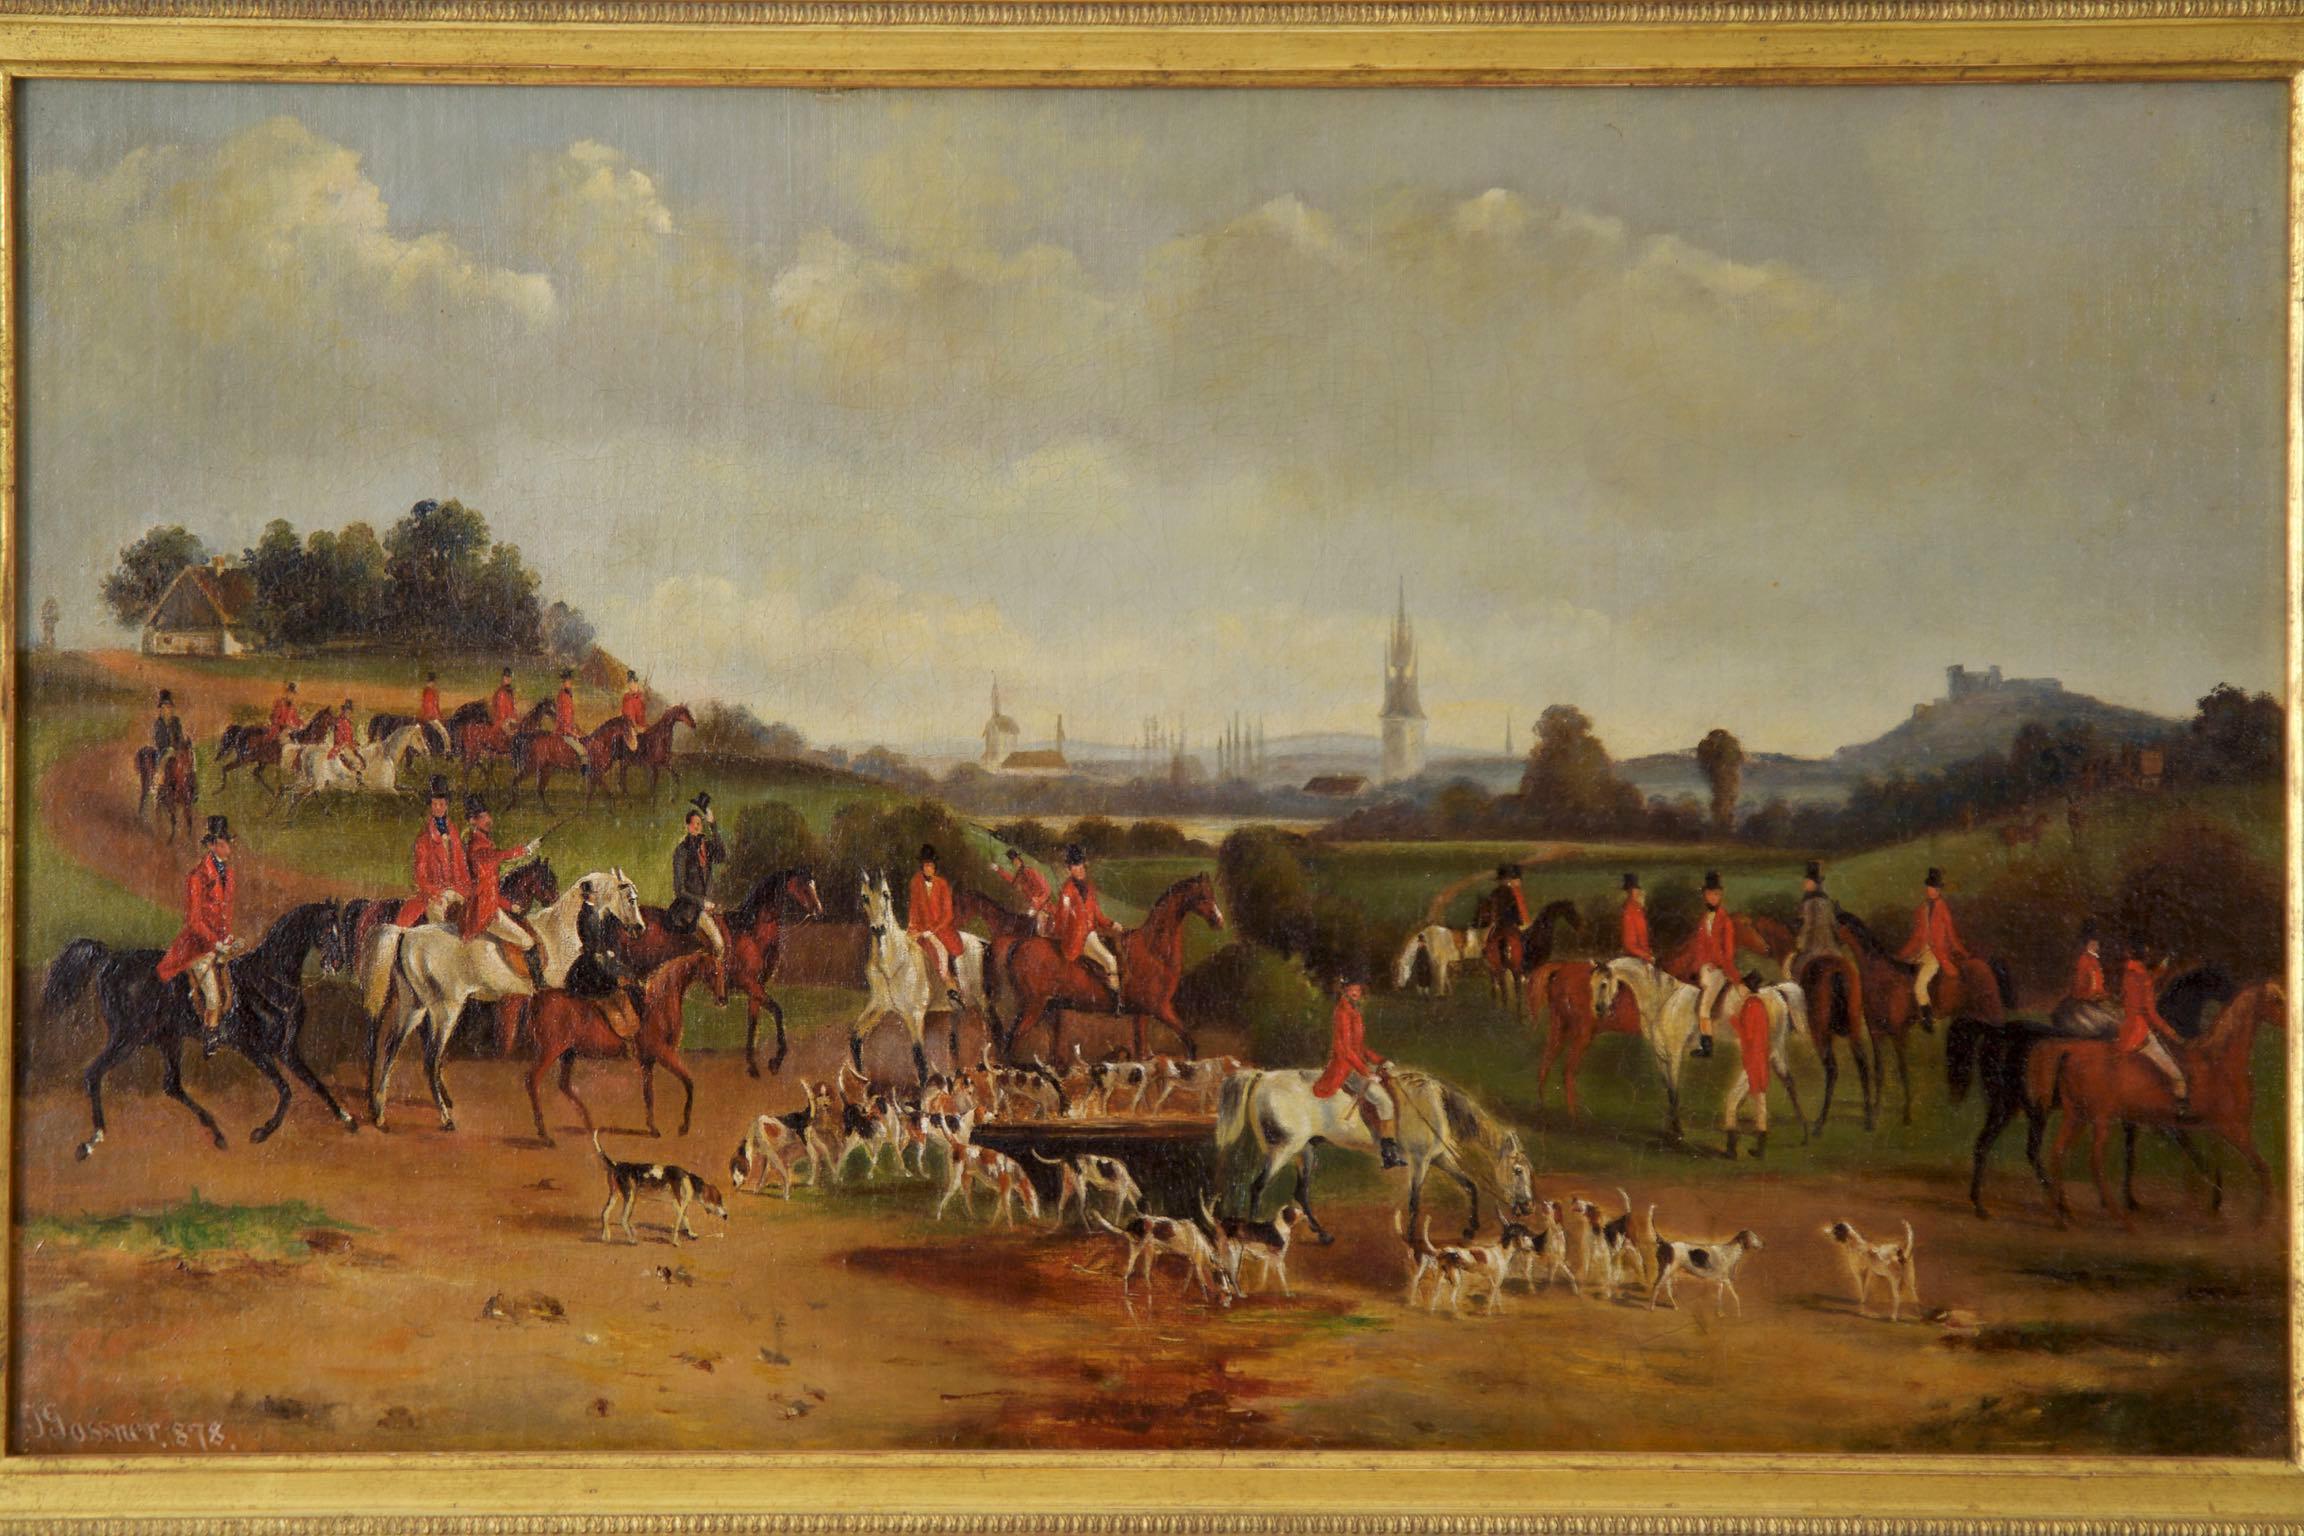 A sprawling and complex sporting scene by unknown British artist “T. Gassner”, the painting captures a wide swath of countryside with spires of various town buildings peering over the horizon with hints of mountains in the far distance before an